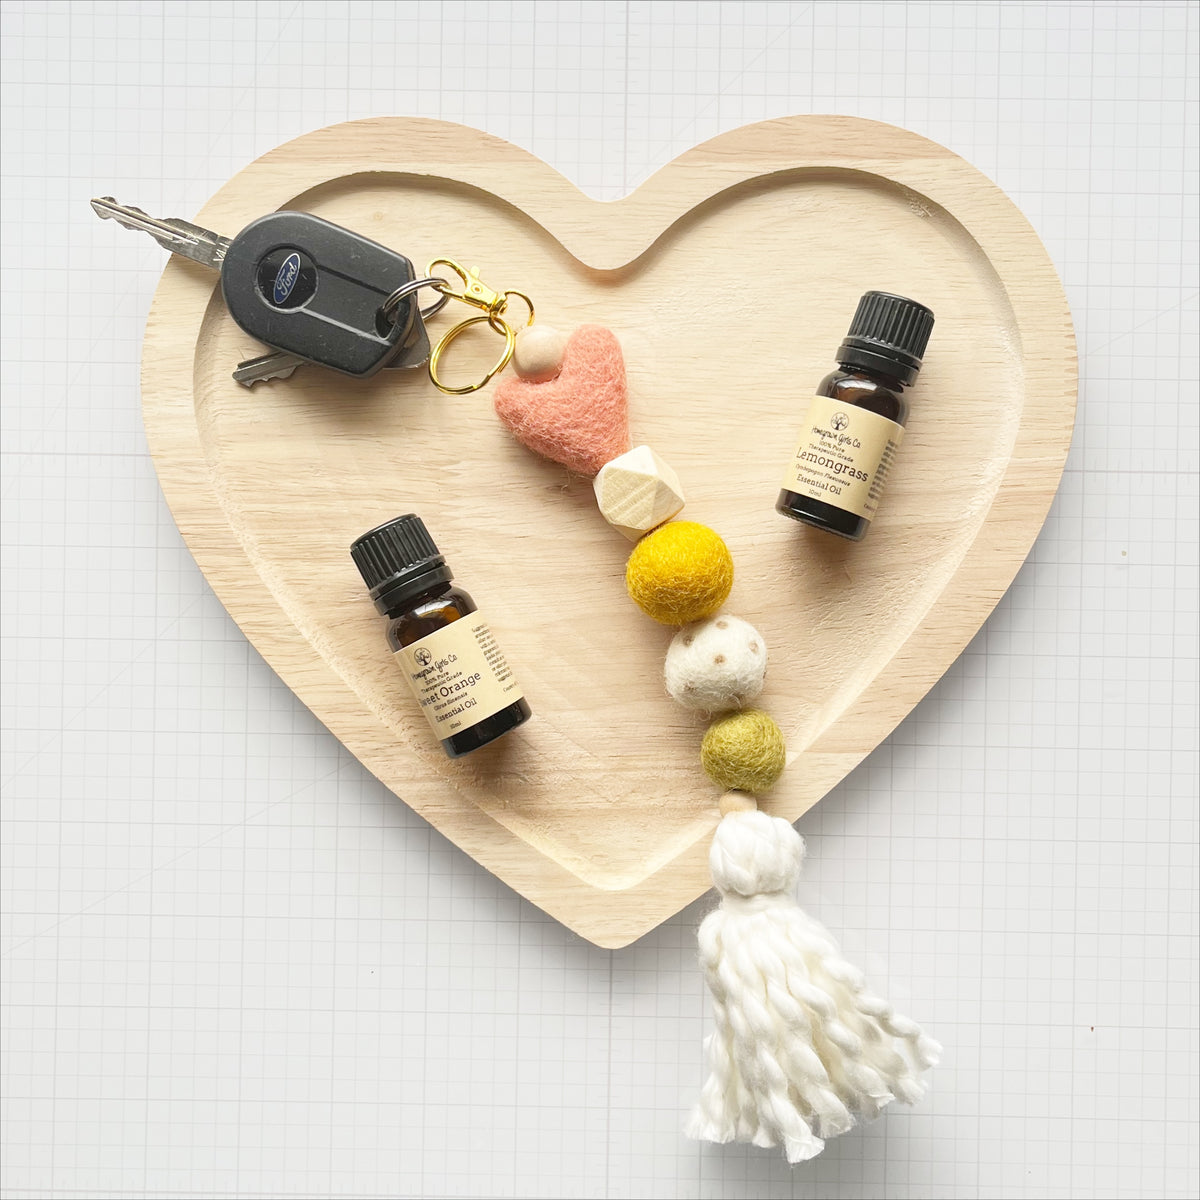 Felt Ball and Wood Bead Keychain Craft Kit With White Wool Felted Hear –  Heartgrooves Handmade